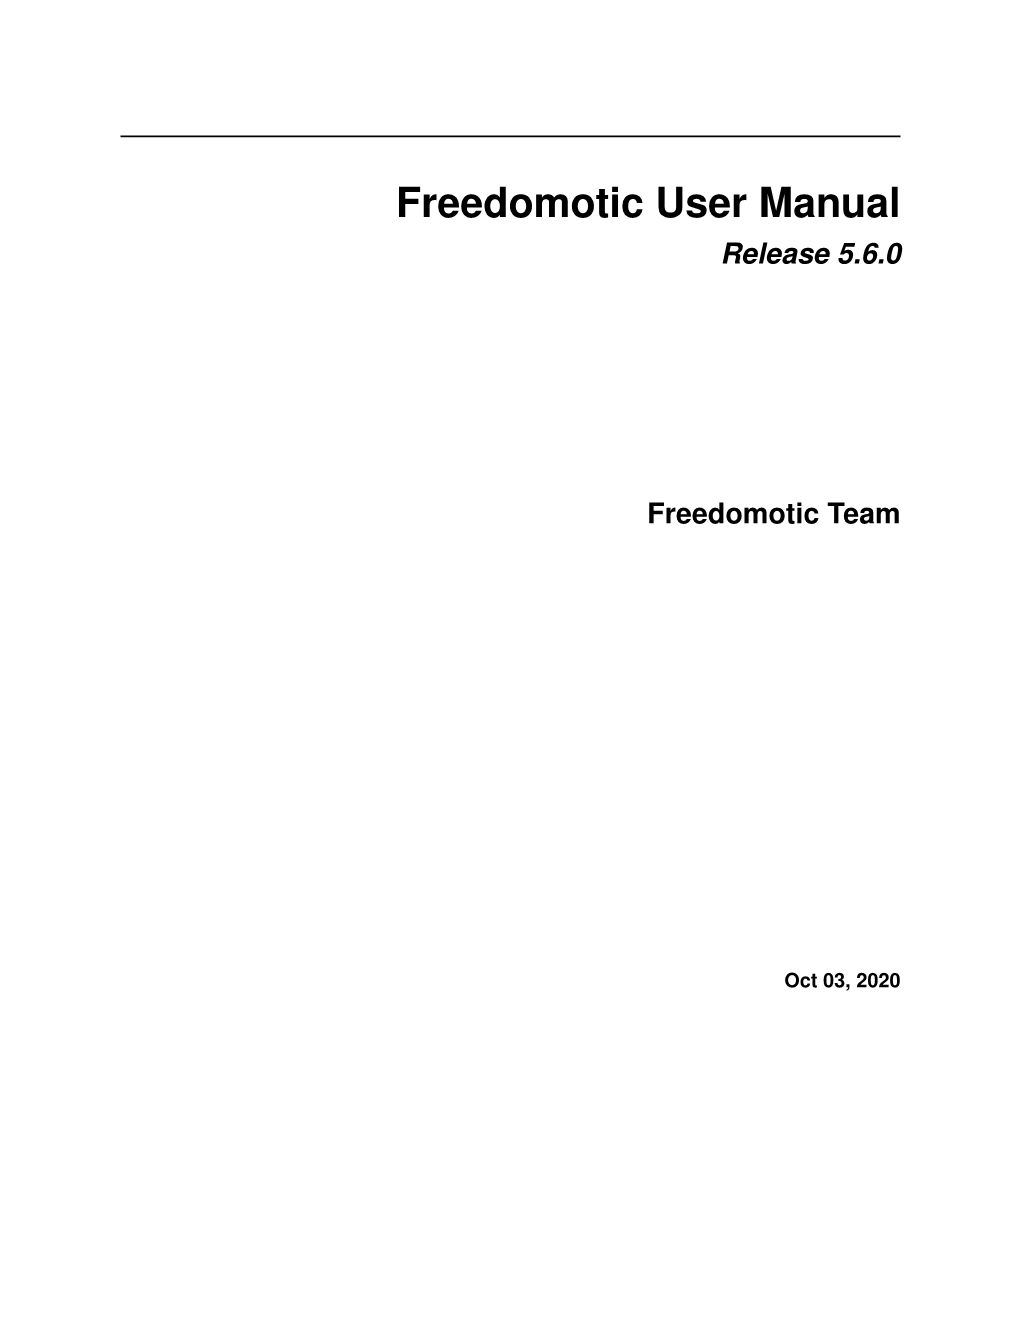 Freedomotic User Manual Release 5.6.0